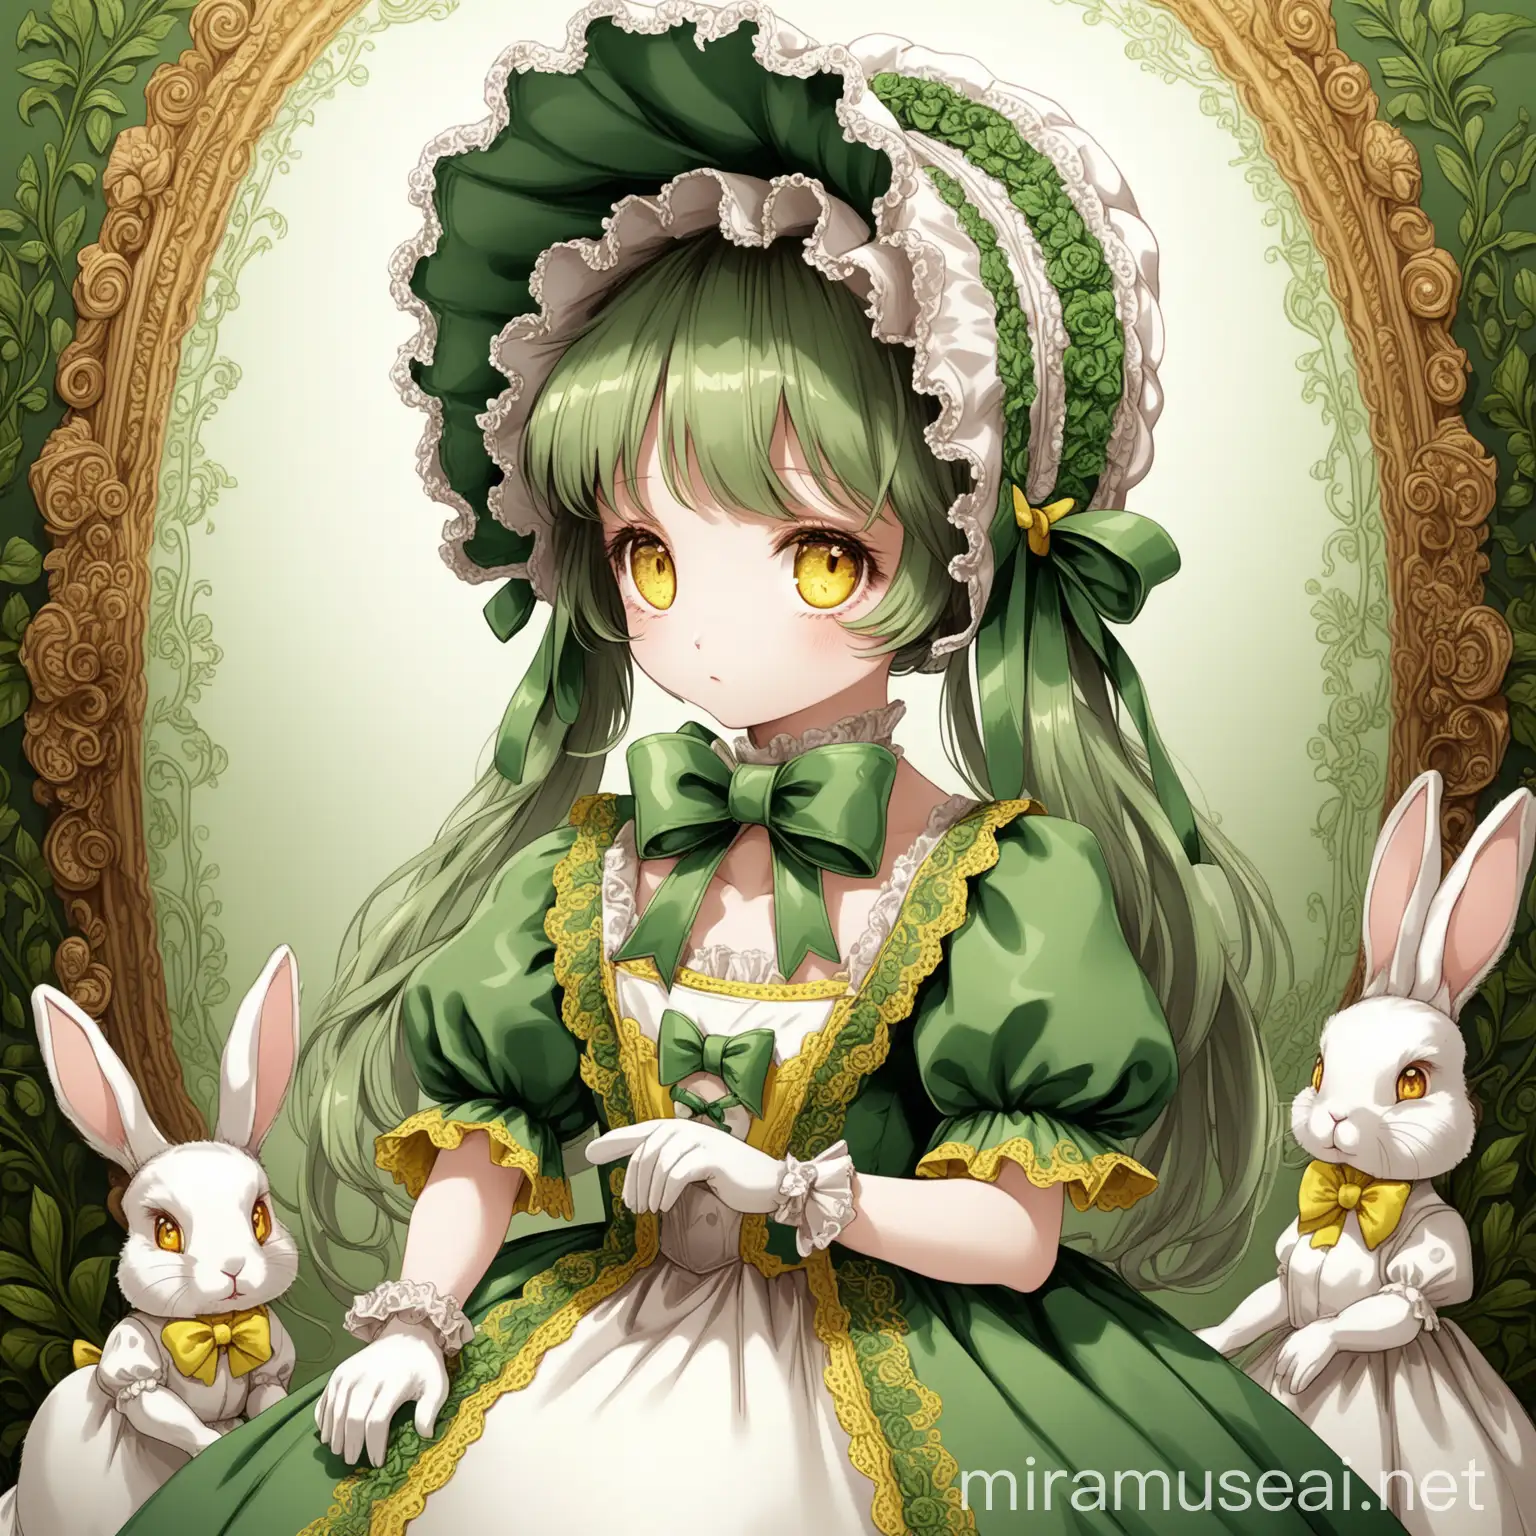 Elegant Rabbit in Green Fur with Yellow Eyes and Intricate Gowns